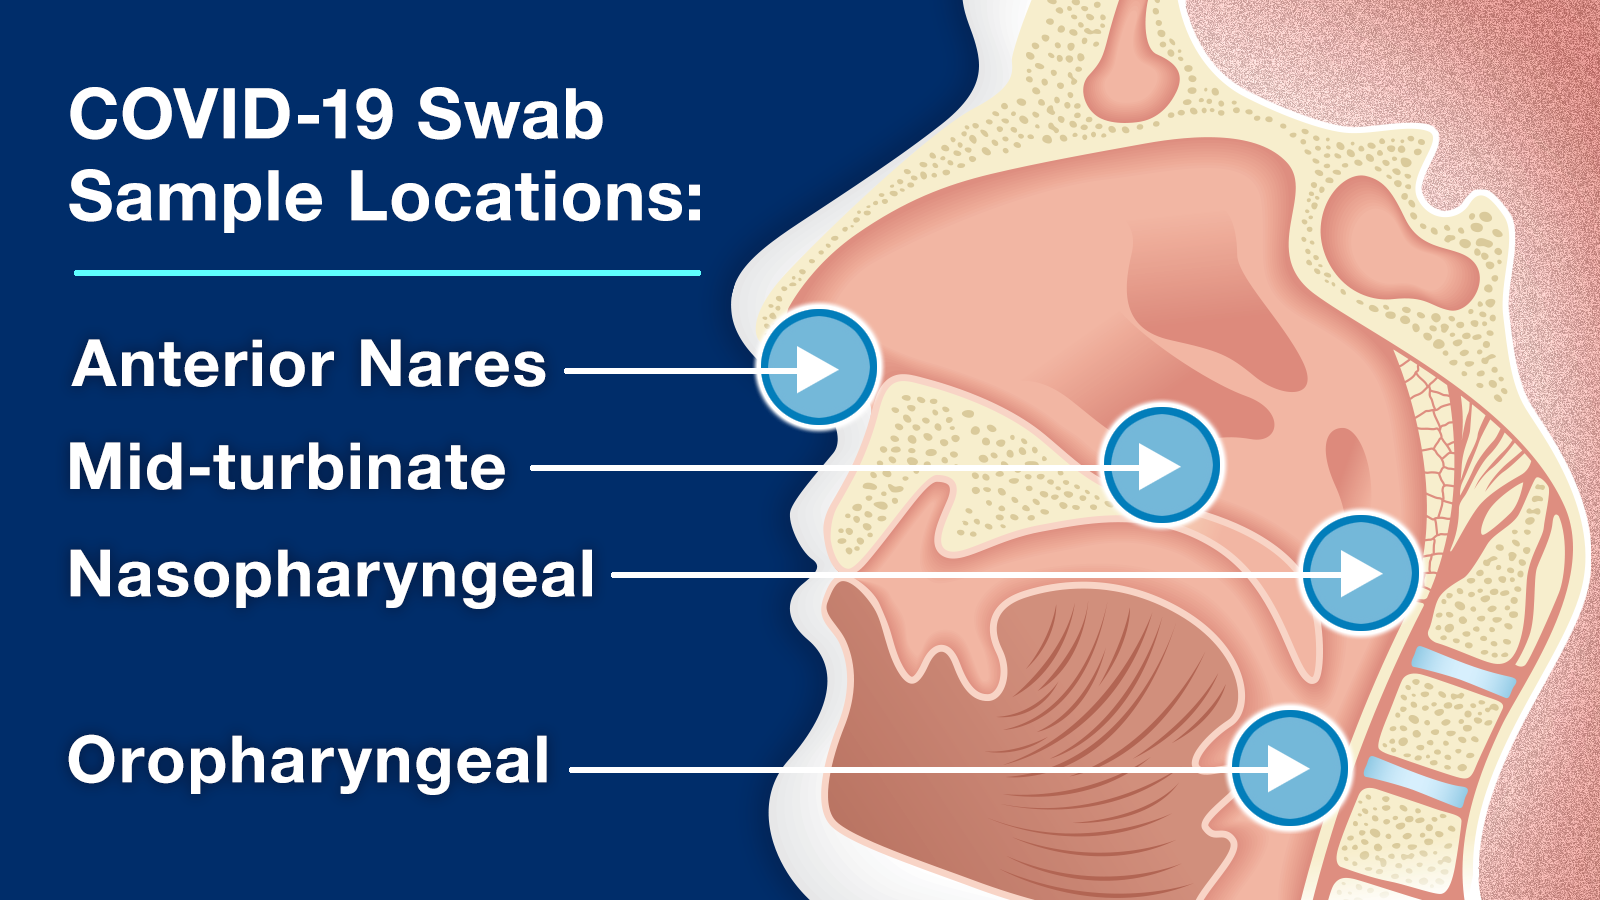 COVID-19 swab sample locations: Anterior Nares, Mid-turbinate, Nasopharyngeal, and Oropharyngeal